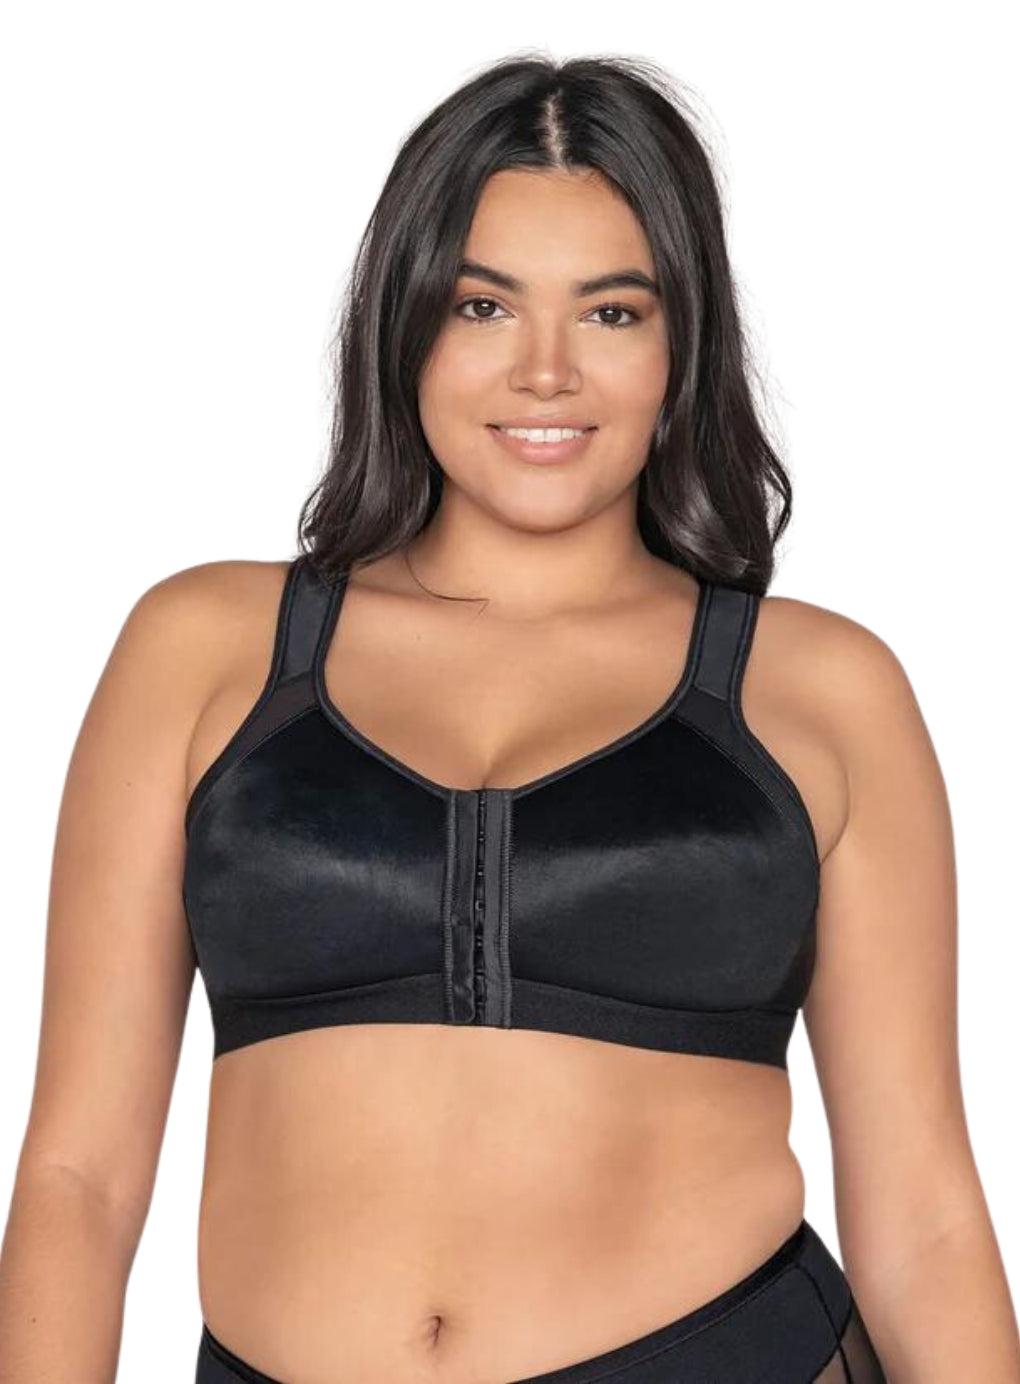 The Shortee is the Original Every Day Back-Smoothing Posture Bra